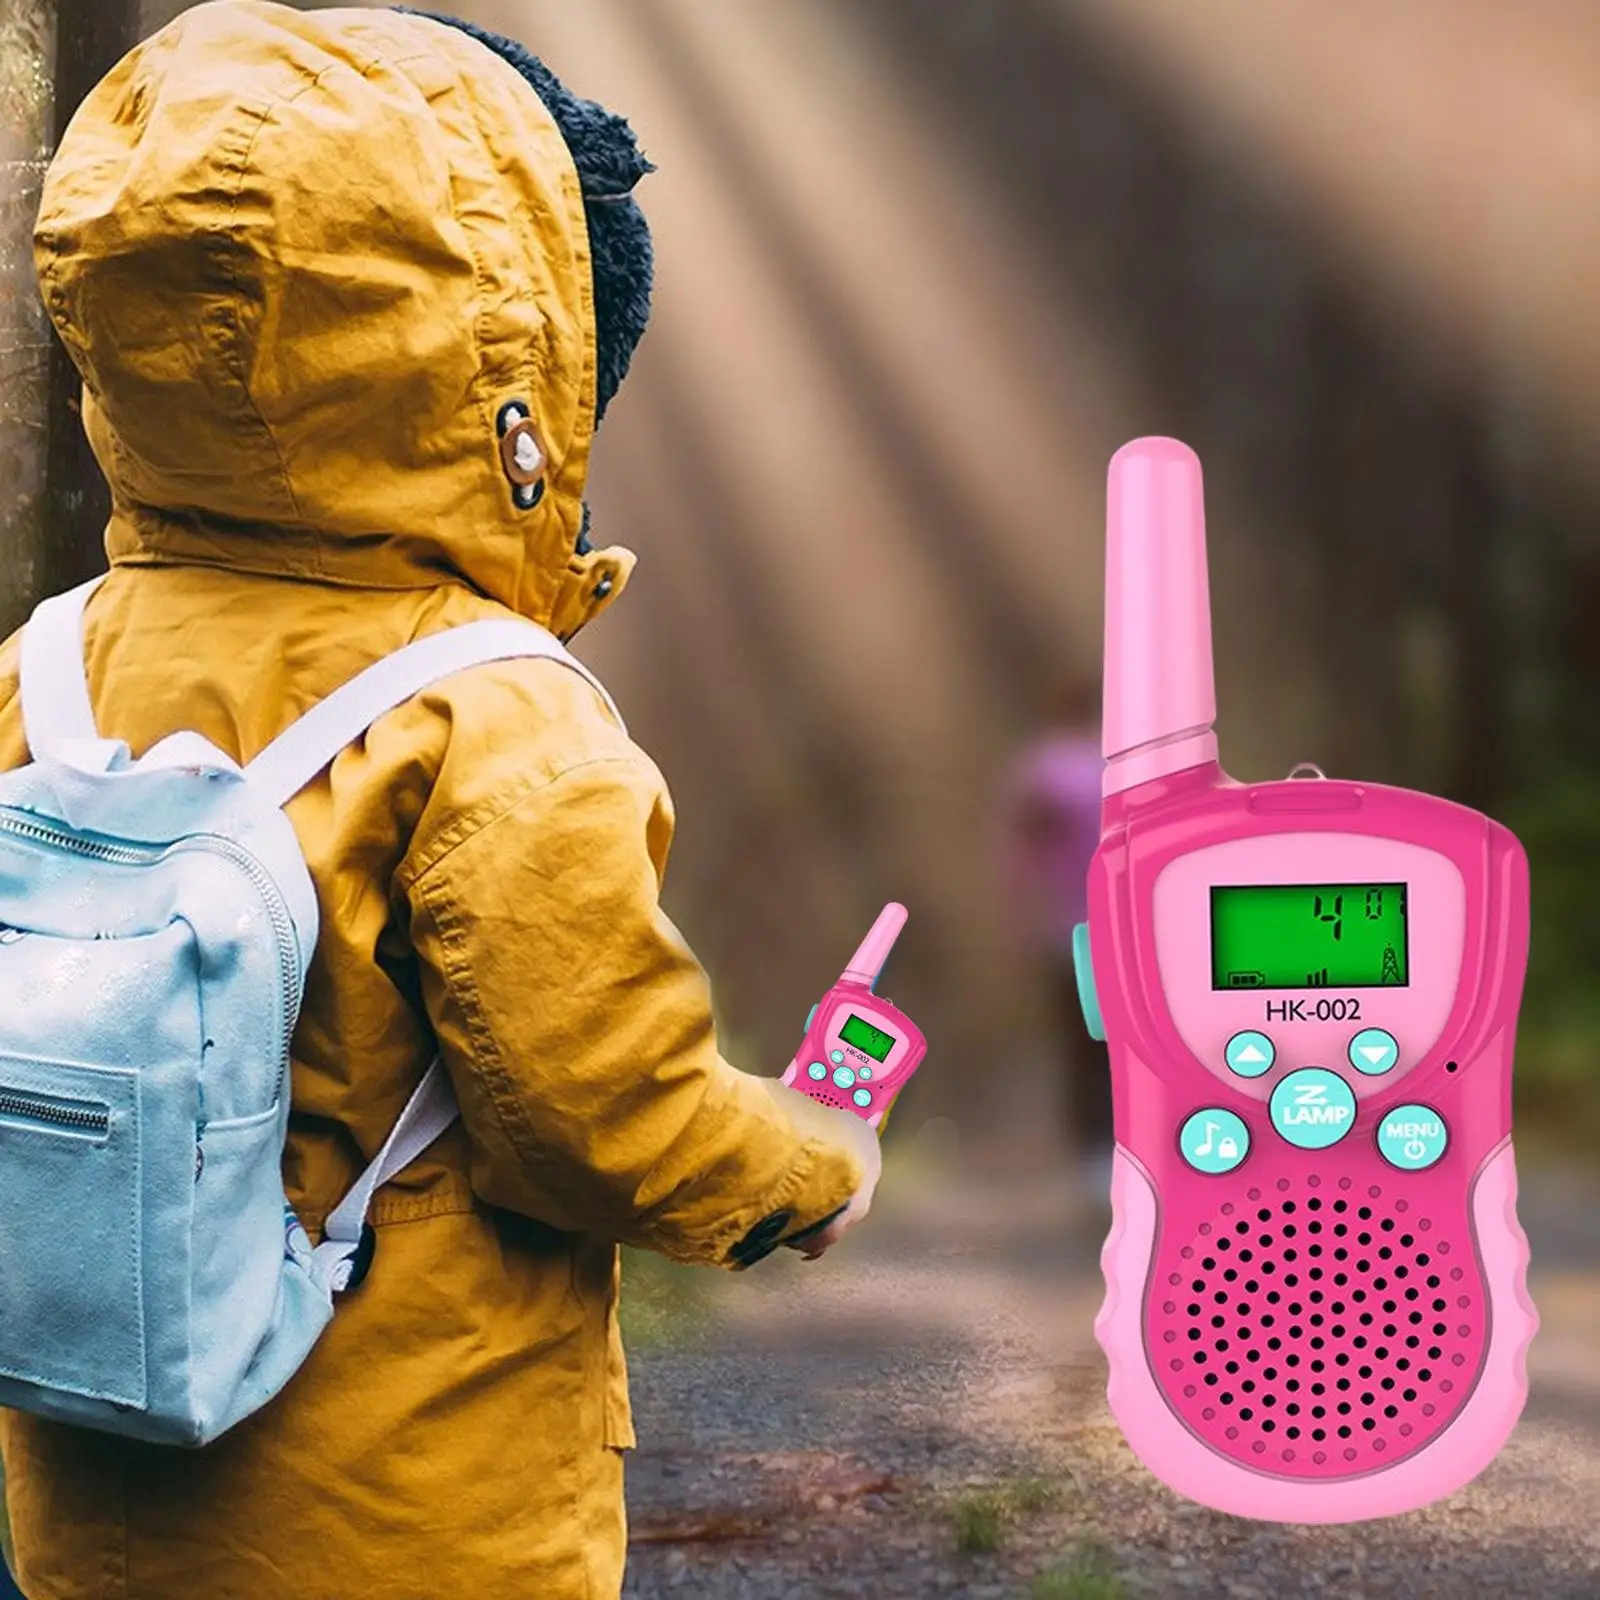 2 Pieces Kids Walkie Talkie Present Flashlight 22 Channels Walky Talky Toy for Games 3-12 Years Old Indoor Outdoor Boys Girls